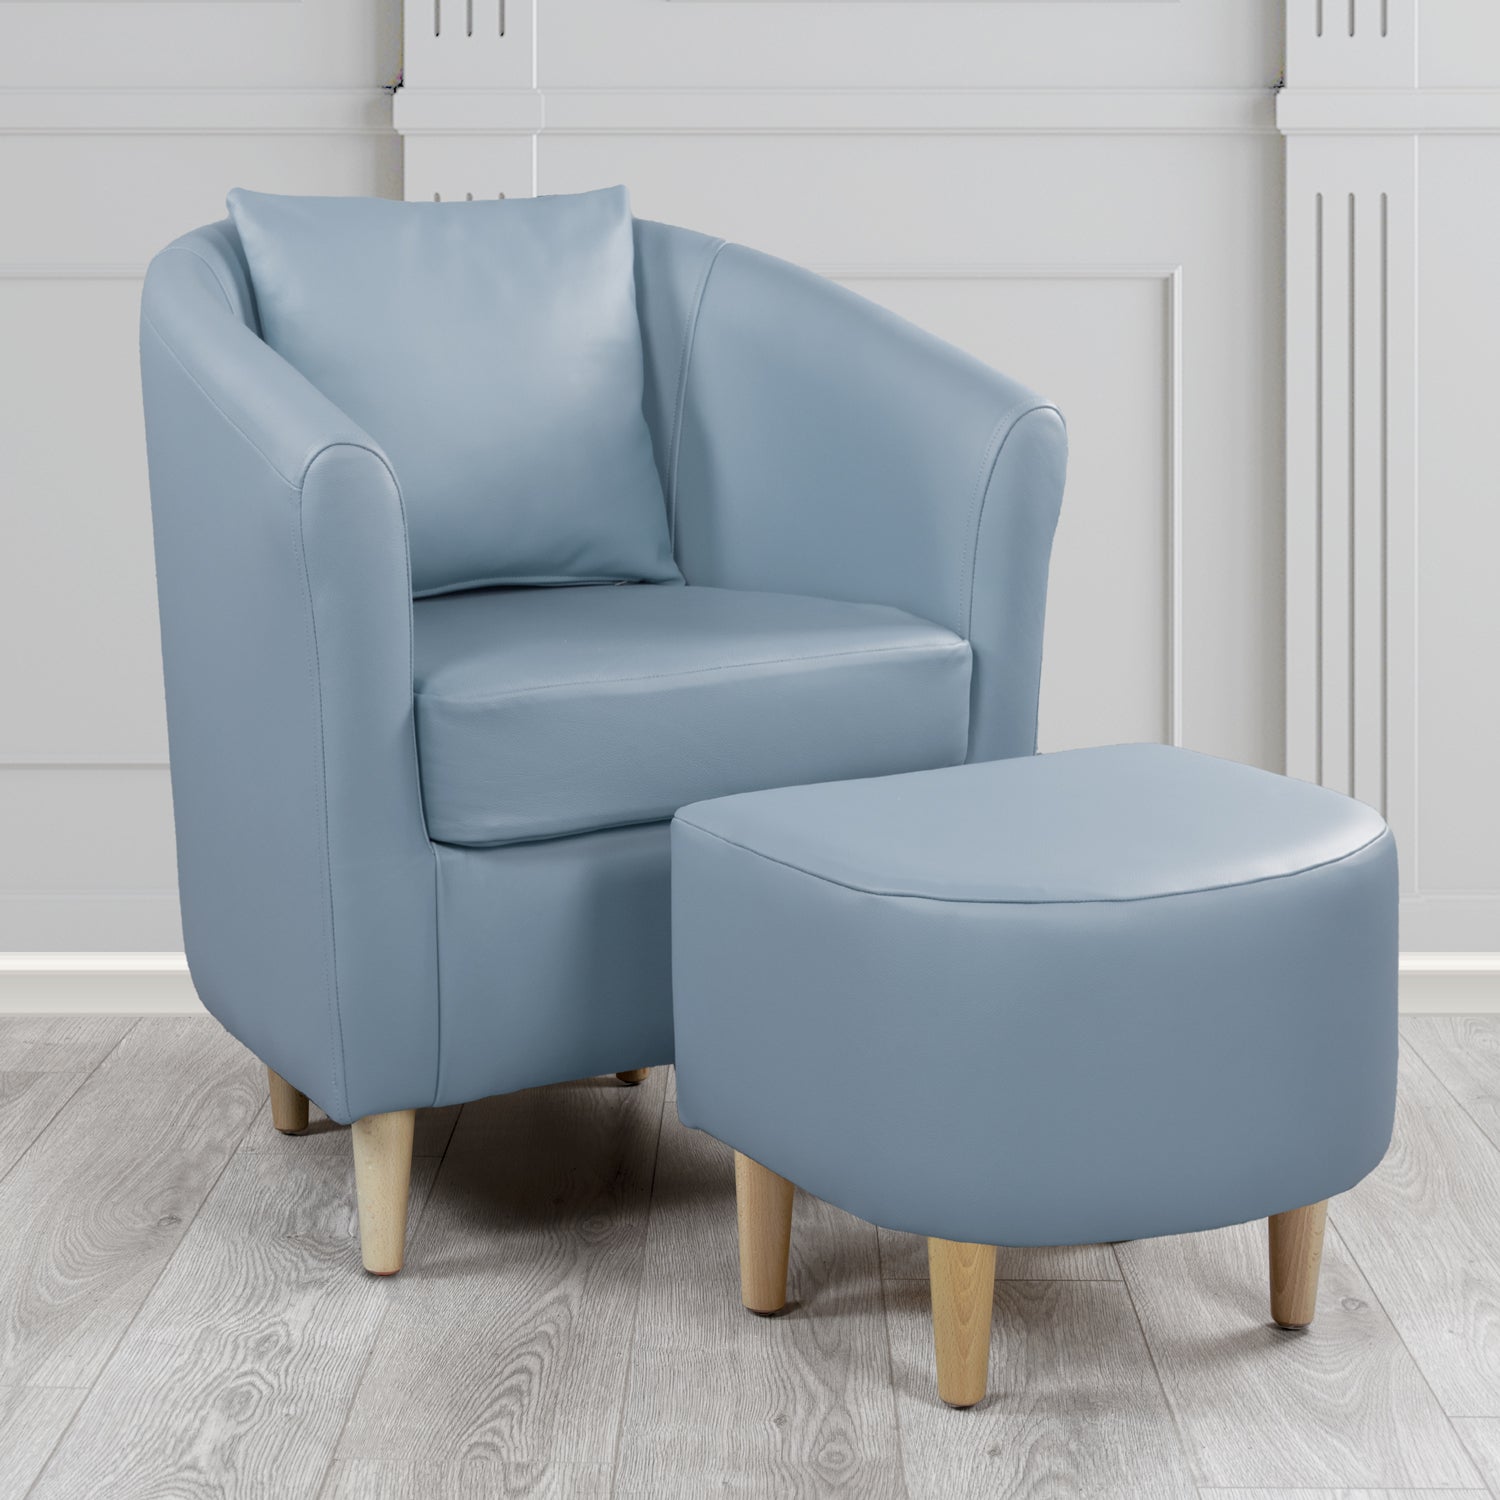 St Tropez Shelly Iceblast Crib 5 Genuine Leather Tub Chair & Footstool Set With Scatter Cushion (6619501428778)